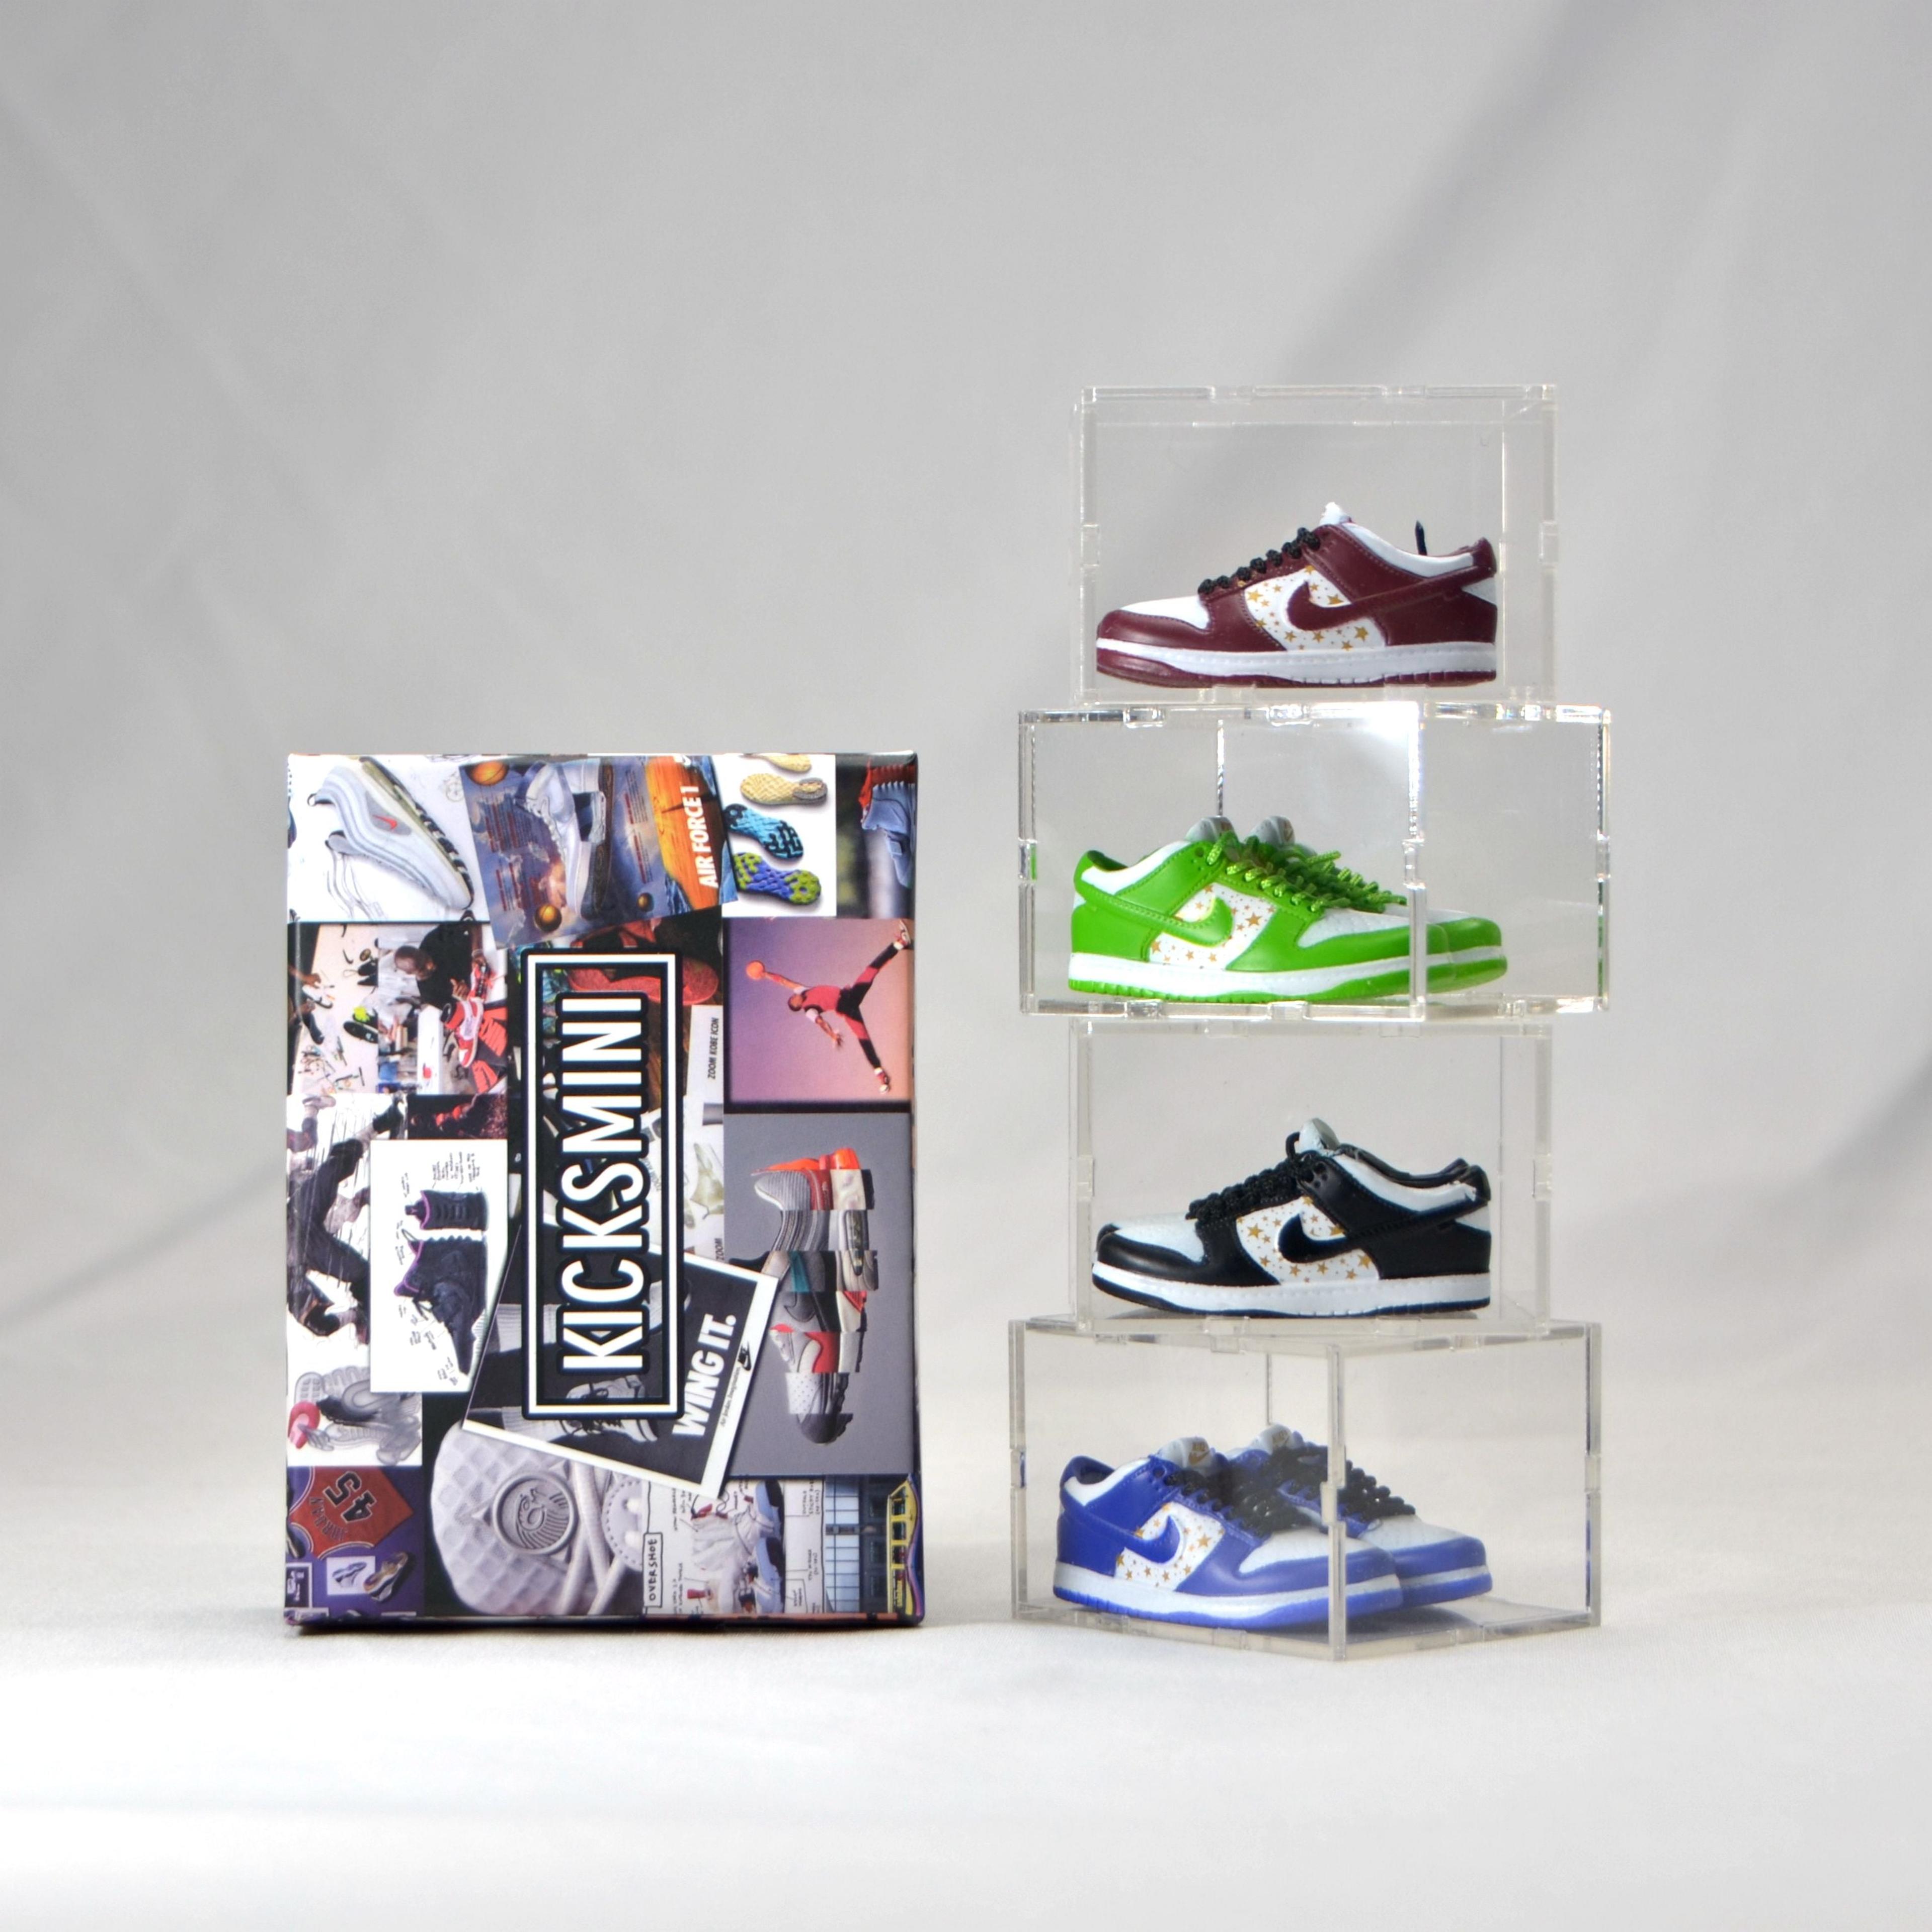 Alternate View 9 of SB Dunk Low Collaboration Mini Sneakers with Display Case